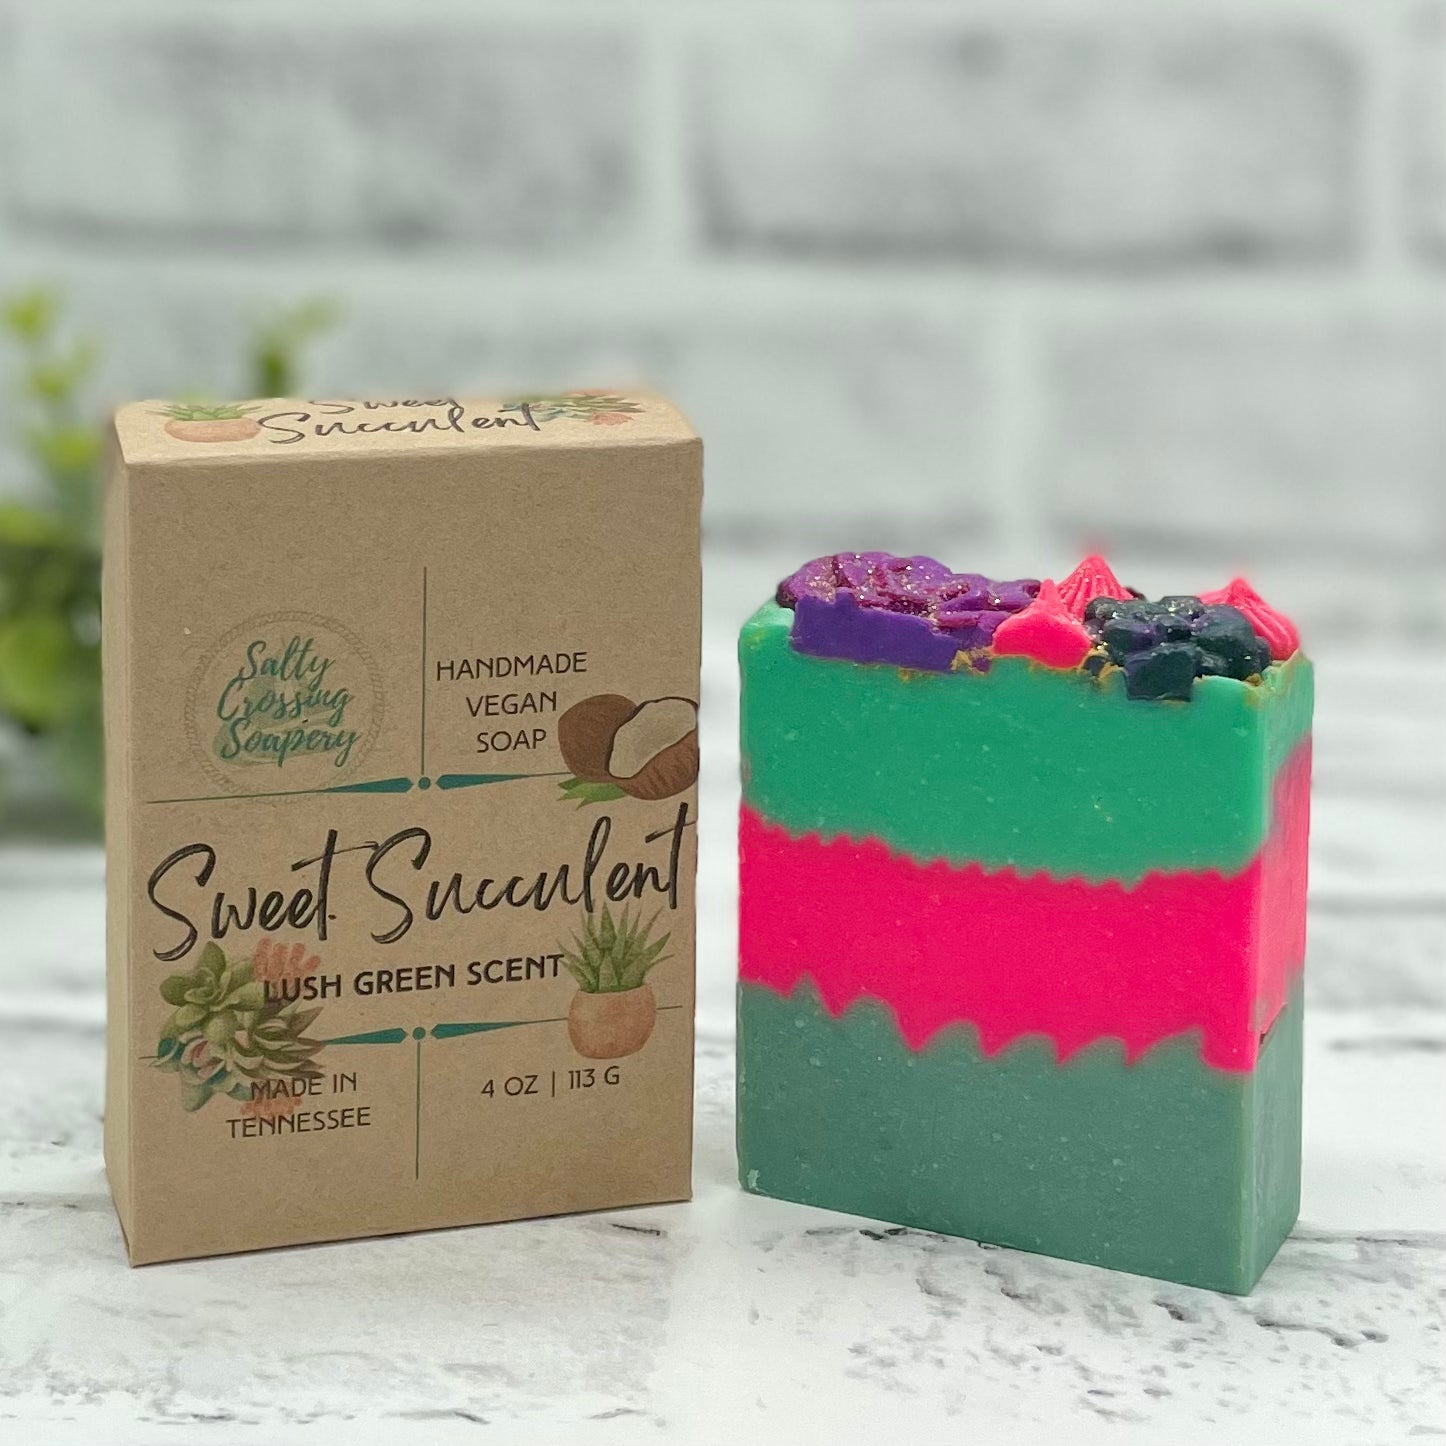 Sweet Succulent coconut milk soap with box